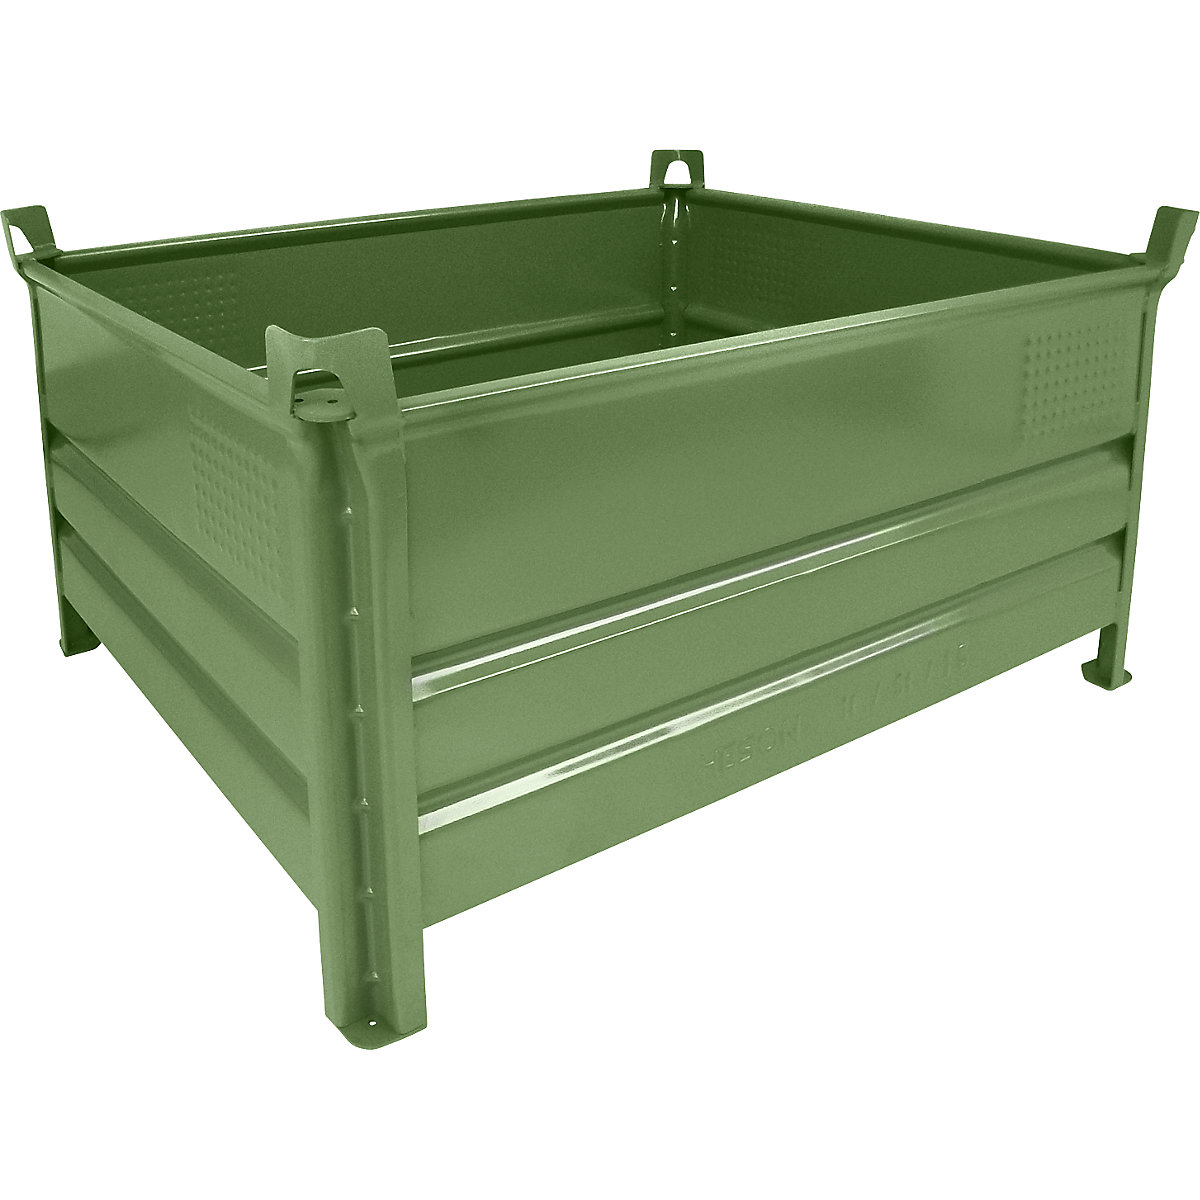 Solid panel box pallet – Heson, WxL 1000 x 1200 mm, max. load 2000 kg, green, 5+ items-5